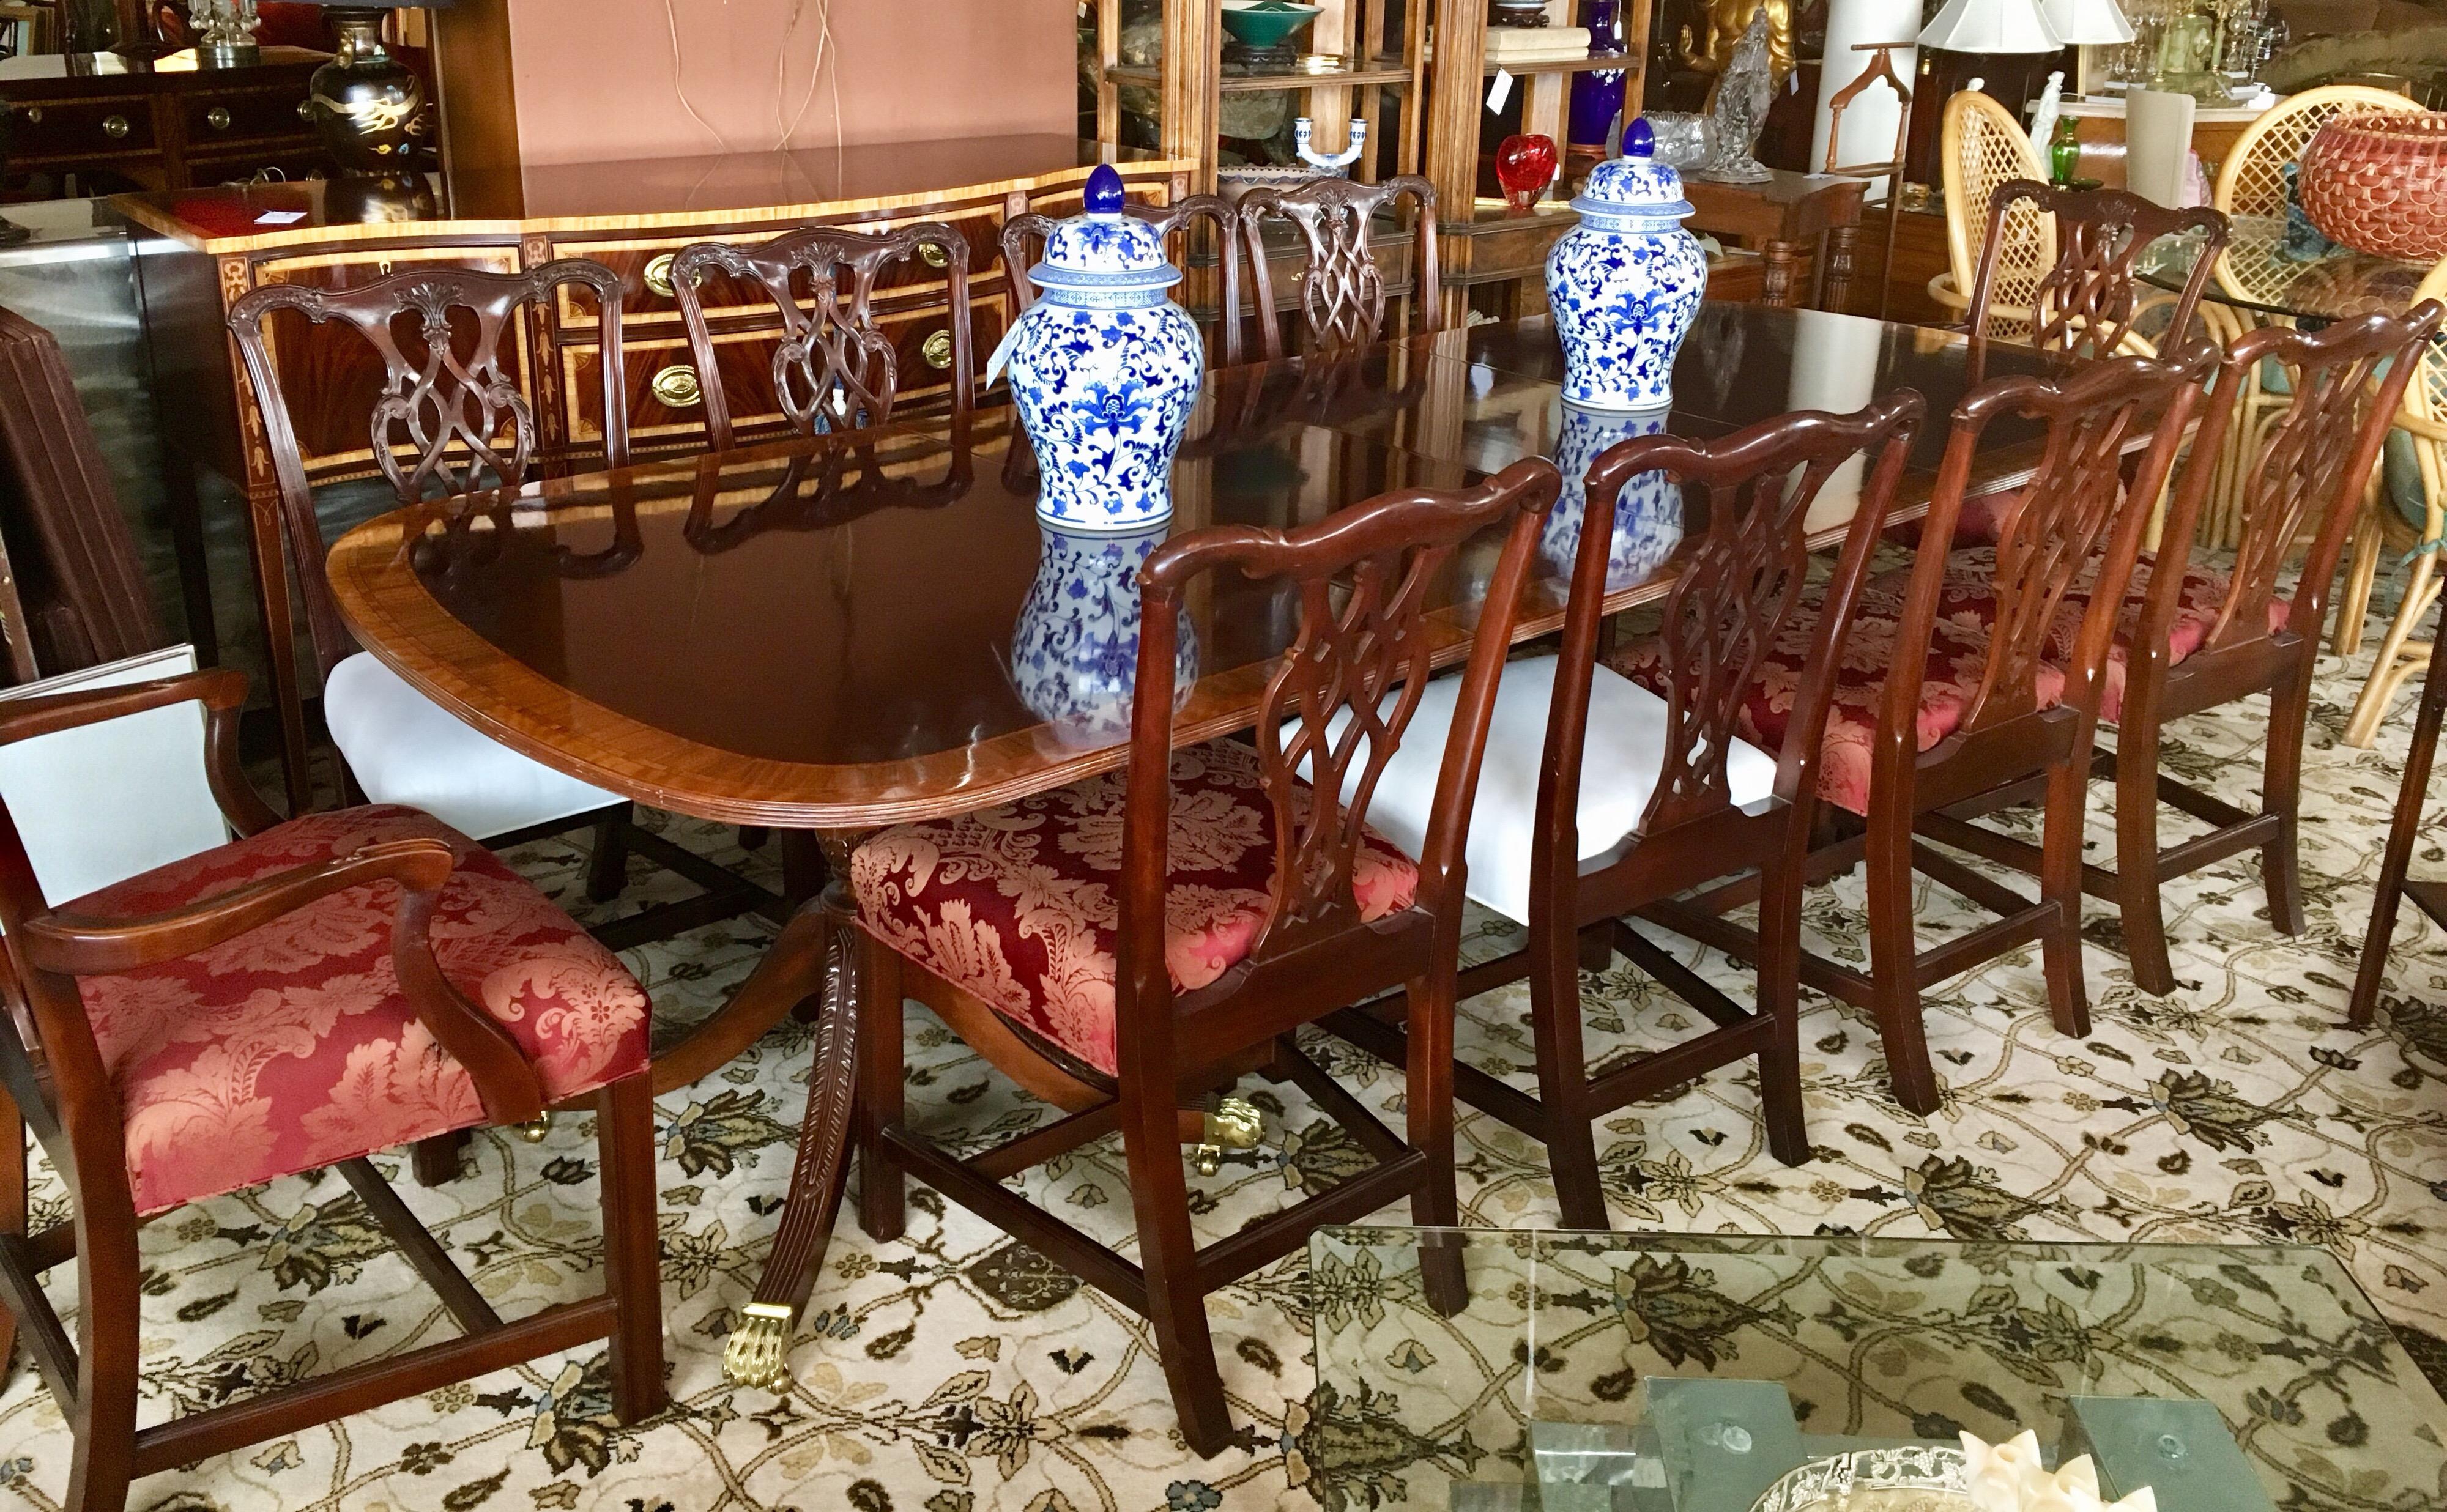 Stunning Councill craftsman mahogany inlay dining room table with twelve matching chairs featuring two different upholstered seat fabrics. There are three twenty inch leaves that expand the table to one hundred and thirty two inches.